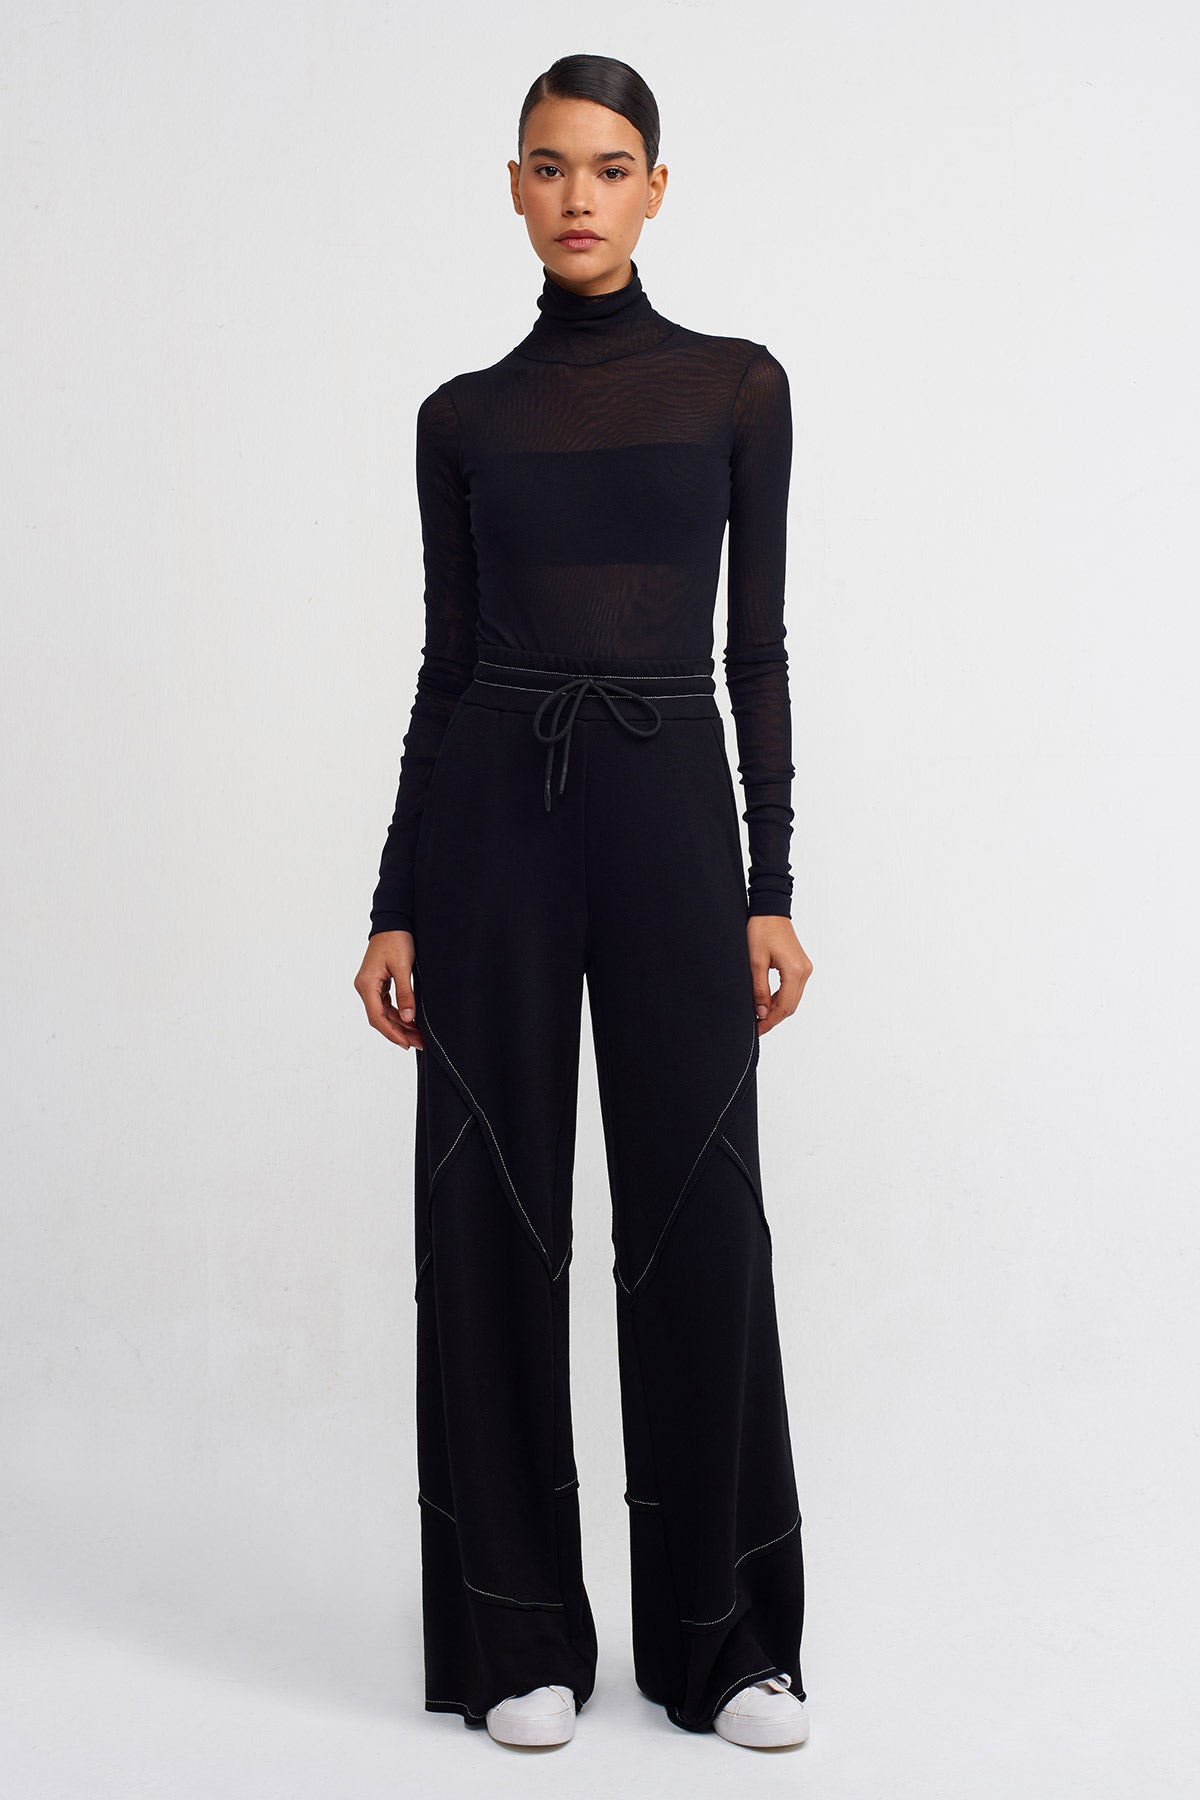 Black Wide Leg With Contrast Stitching Trousers-Y243013040